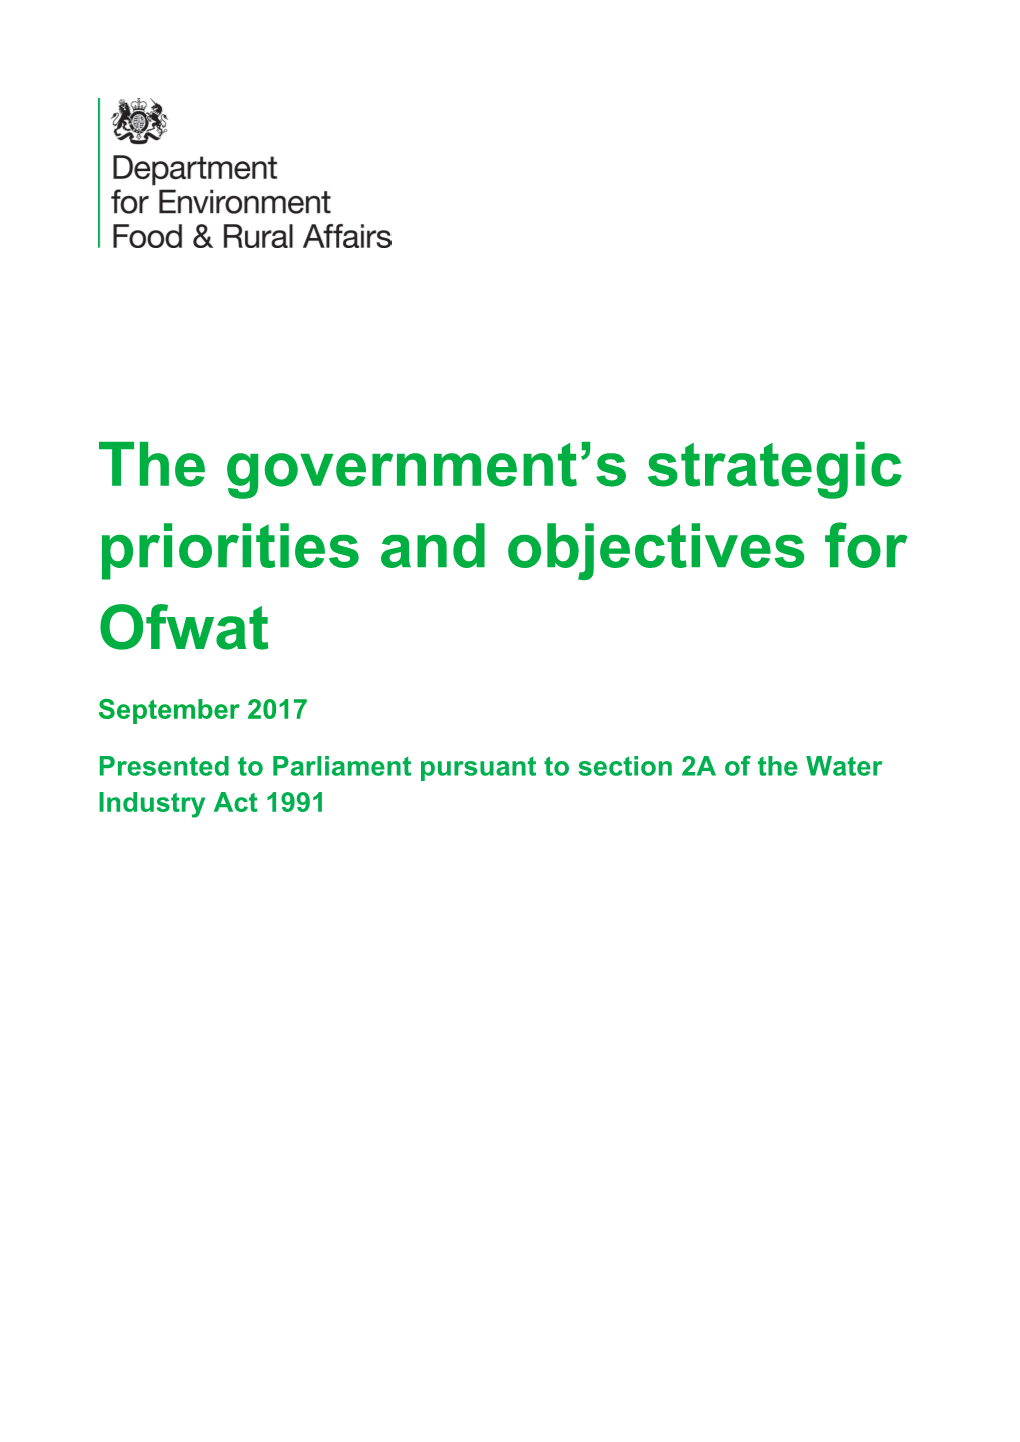 The Government's Strategic Priorities and Objectives for Ofwat